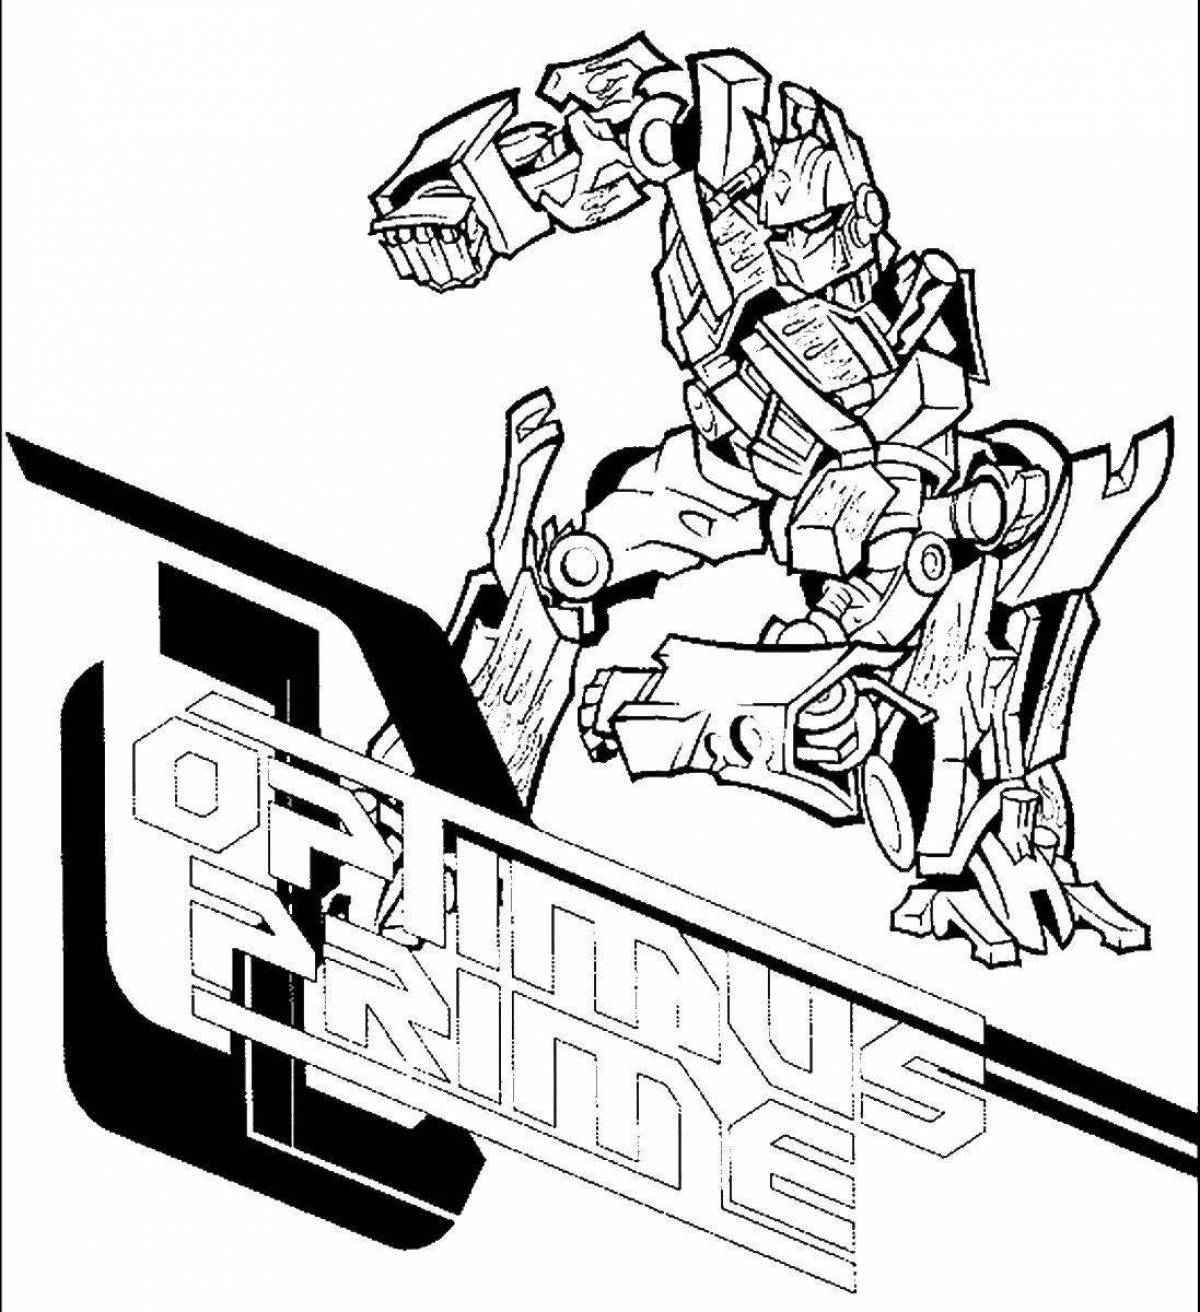 Radiant ironhide coloring page